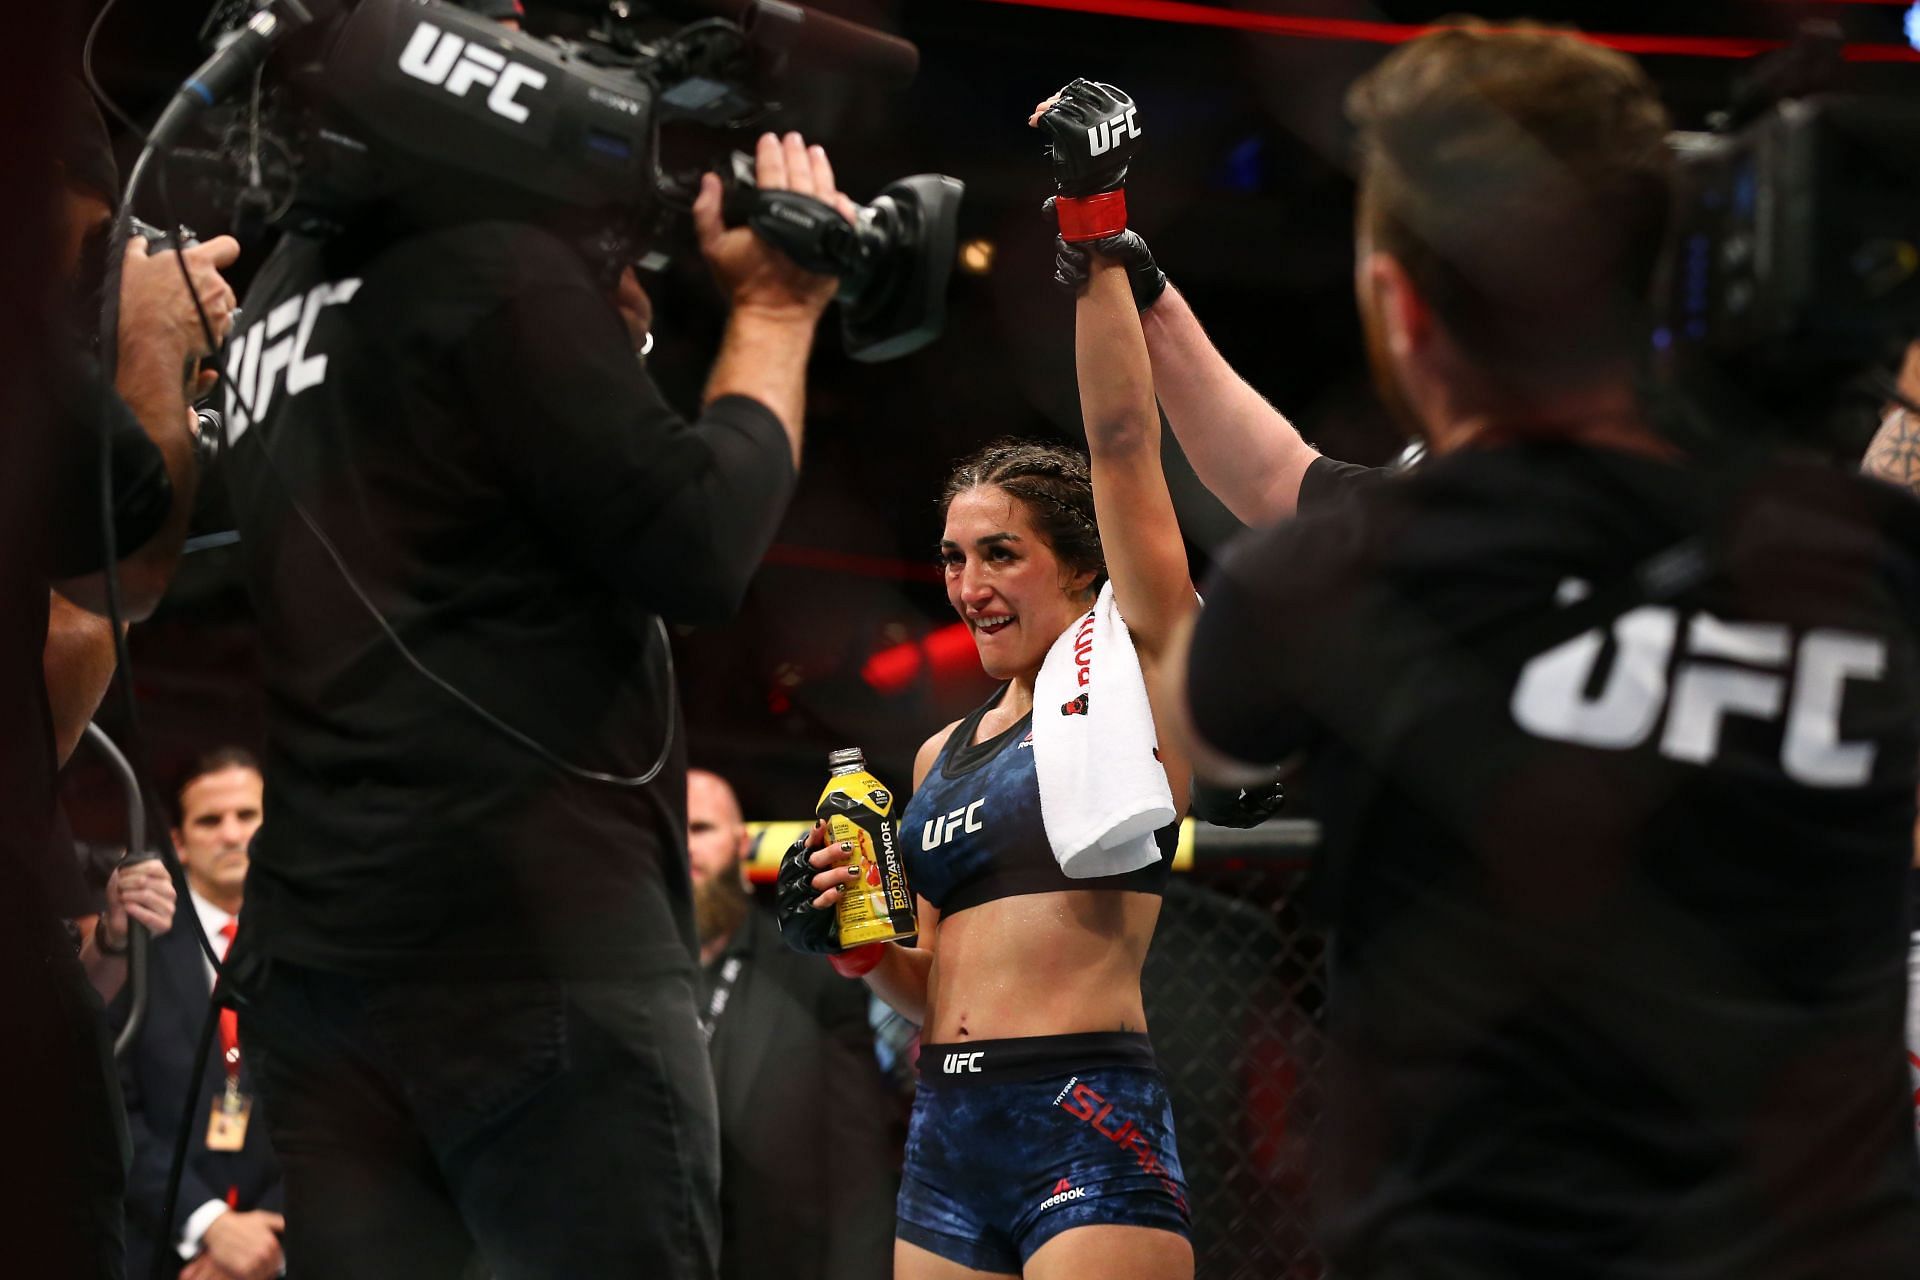 A strawweight title shot must lie in the future for Tatiana Suarez